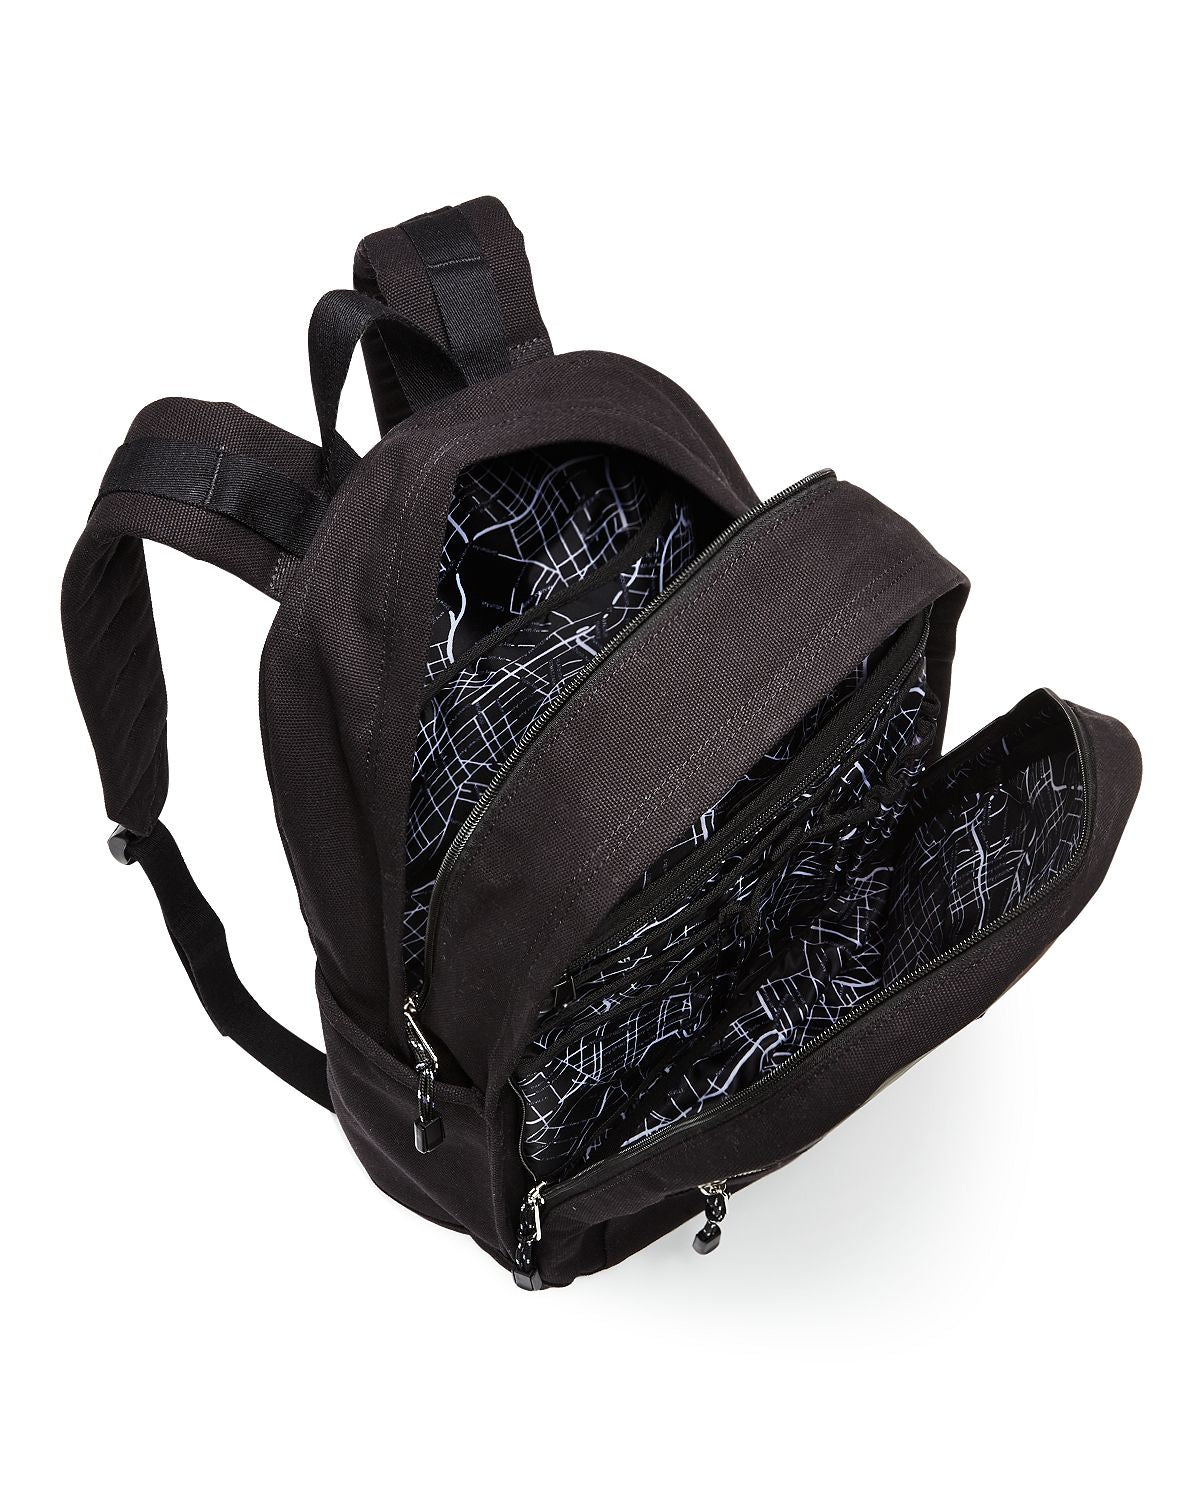 State Nevins Camouflage Backpack Camo/Black